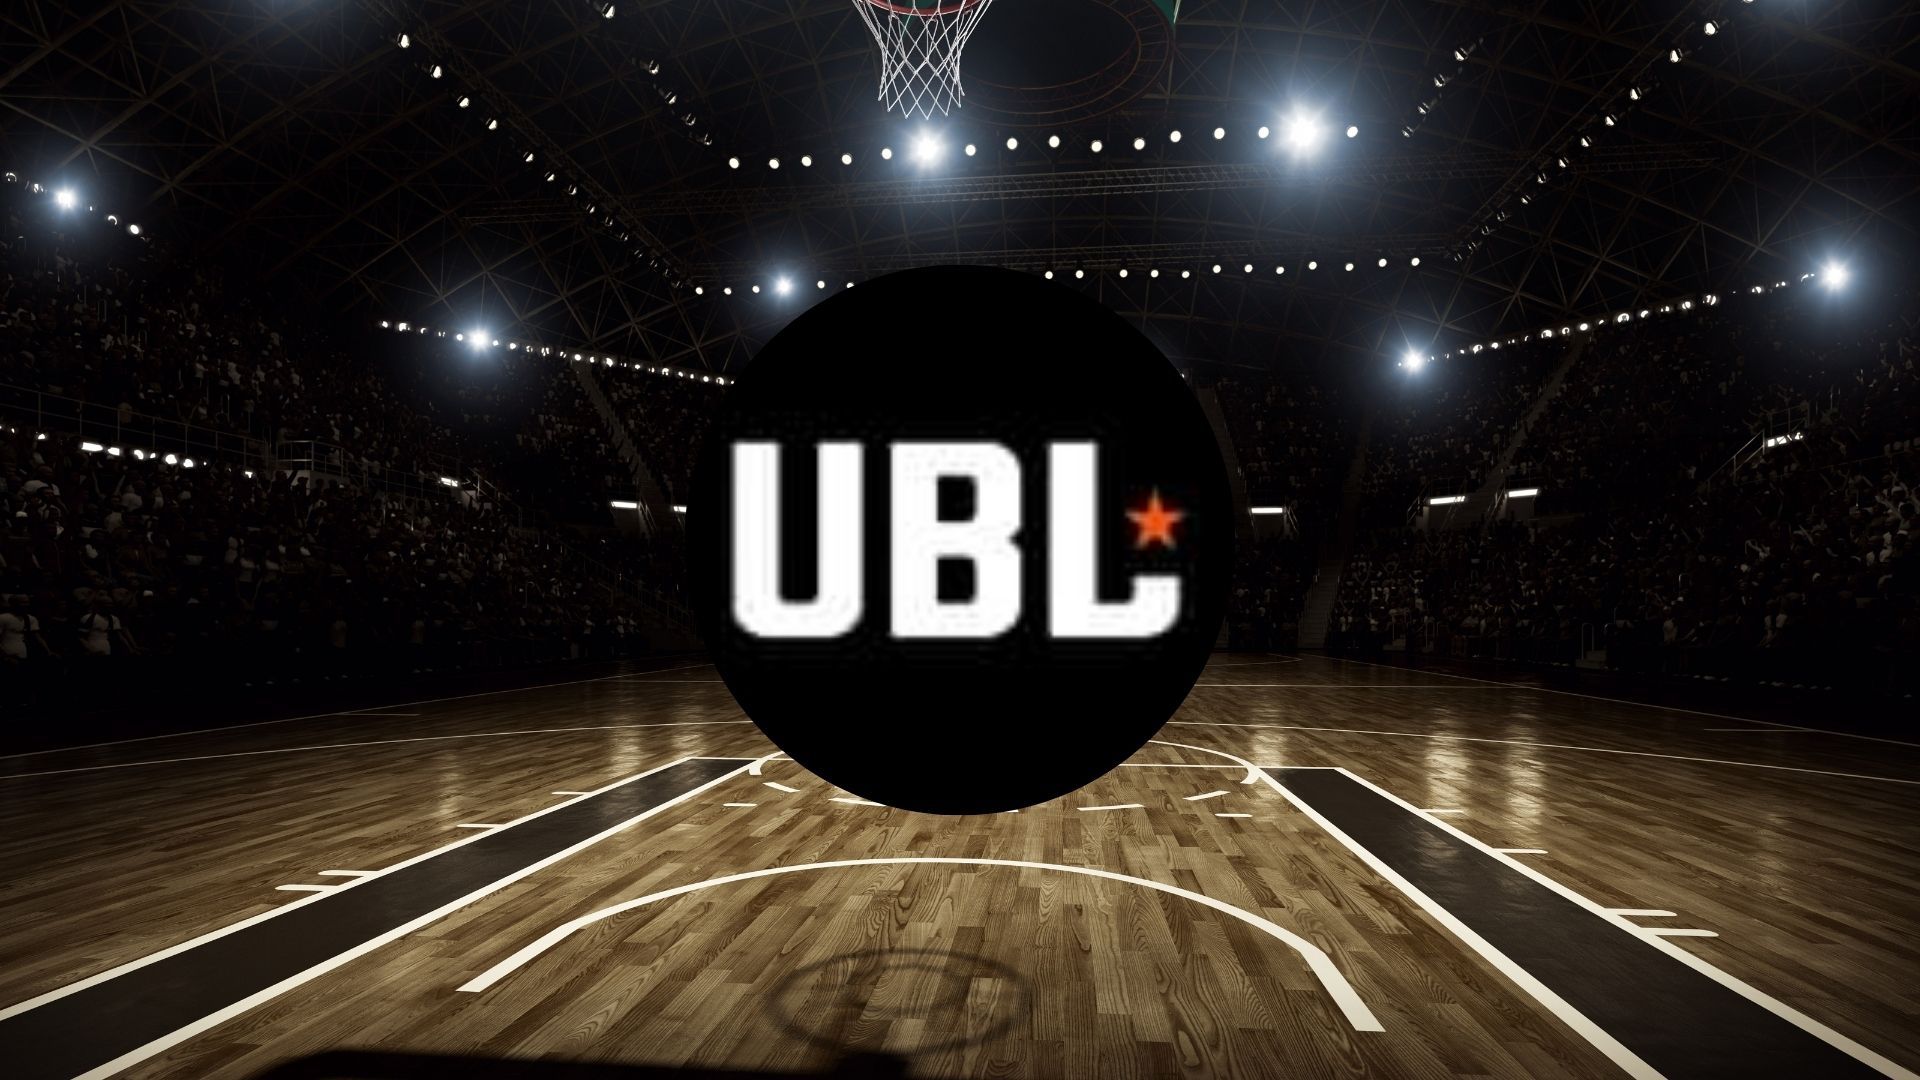 united basketball league logo in front of court